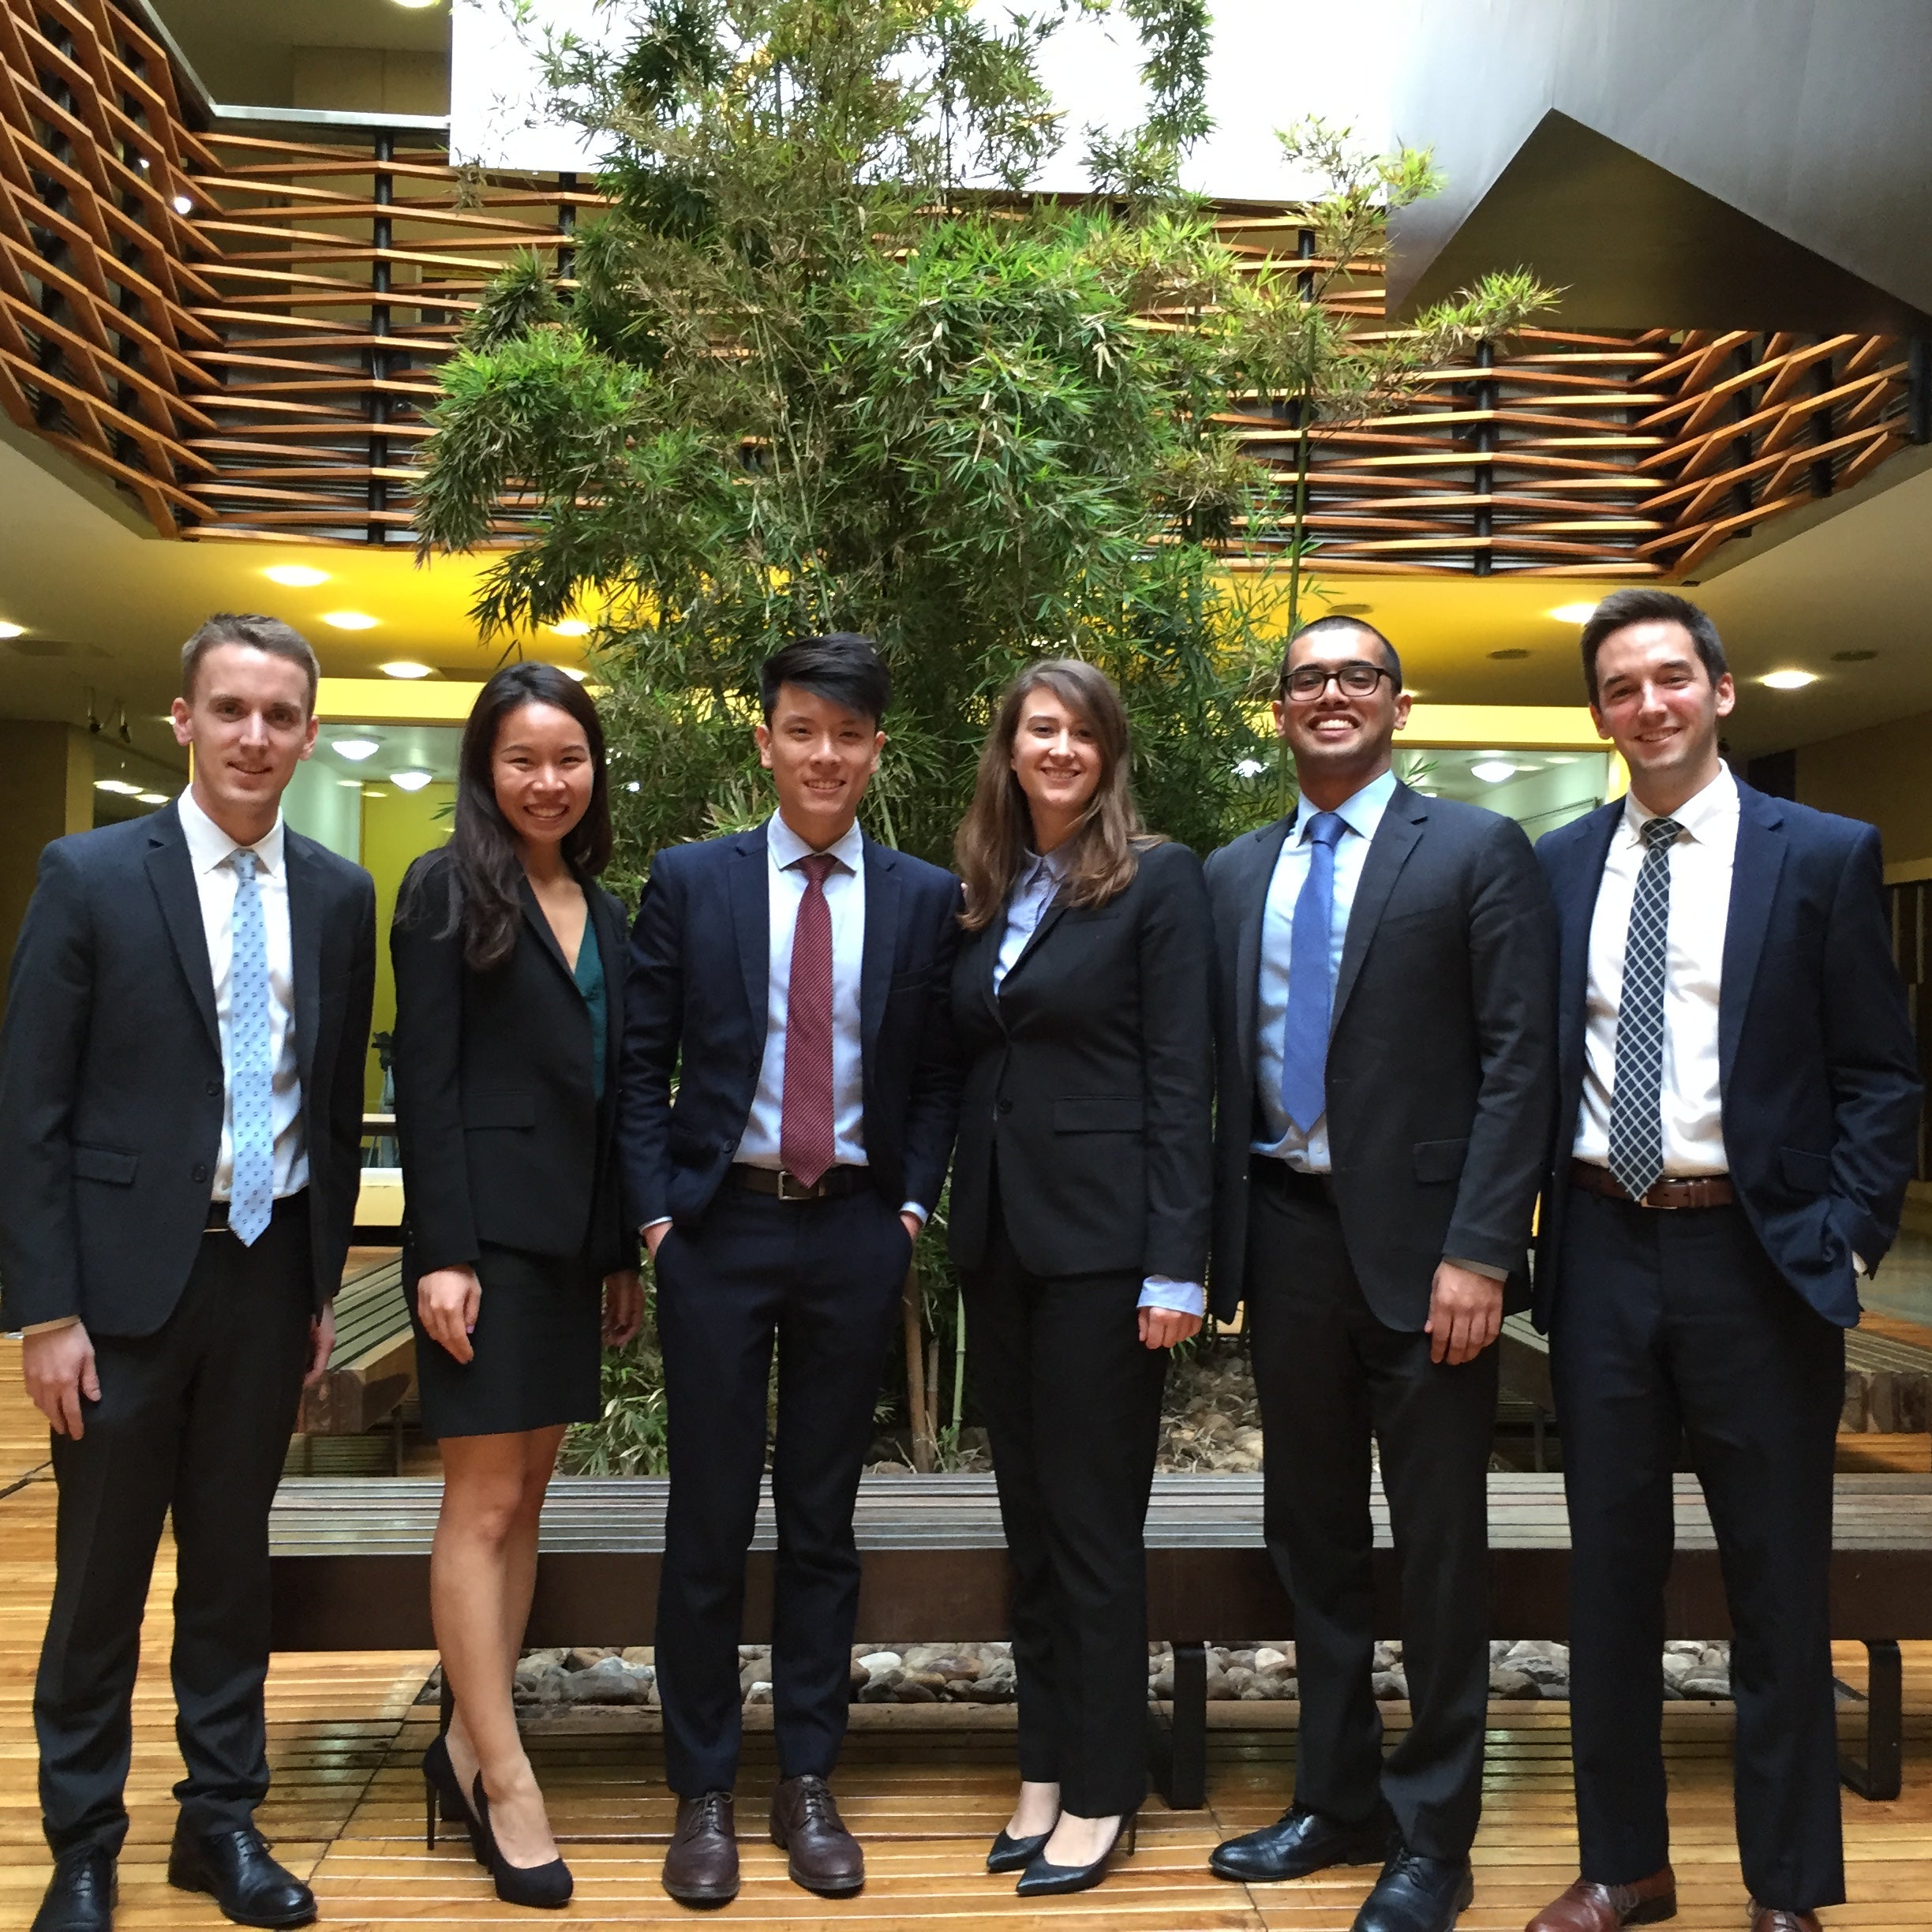 The 2017 World Trade Organization (WTO) moot court team from Harvard Law School won the All-America Regional Rounds in March